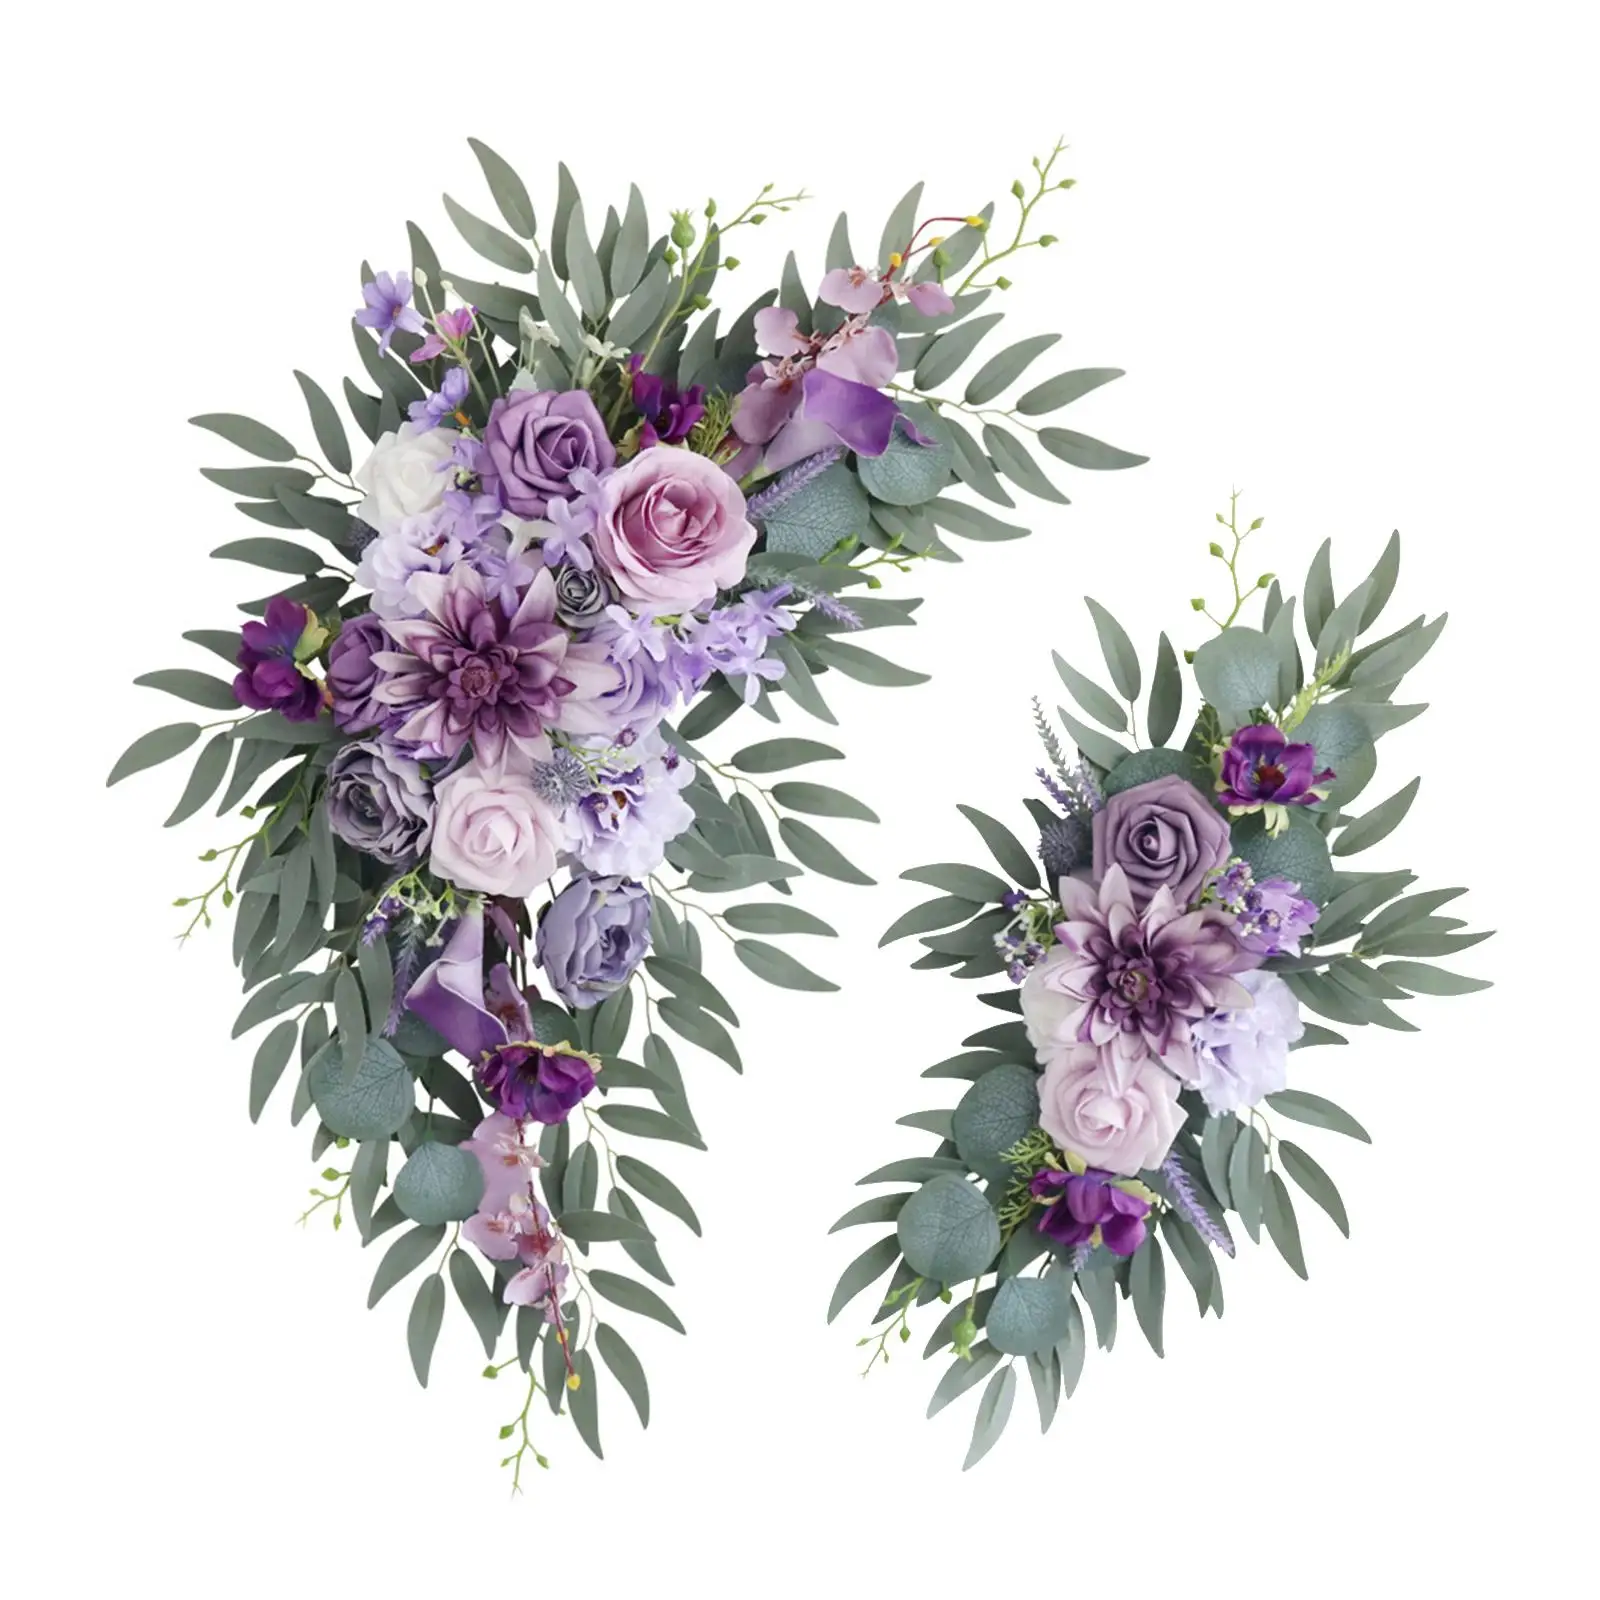 2 Pieces Simulation Wedding Floral Swags Floral Decorations for Wedding Home